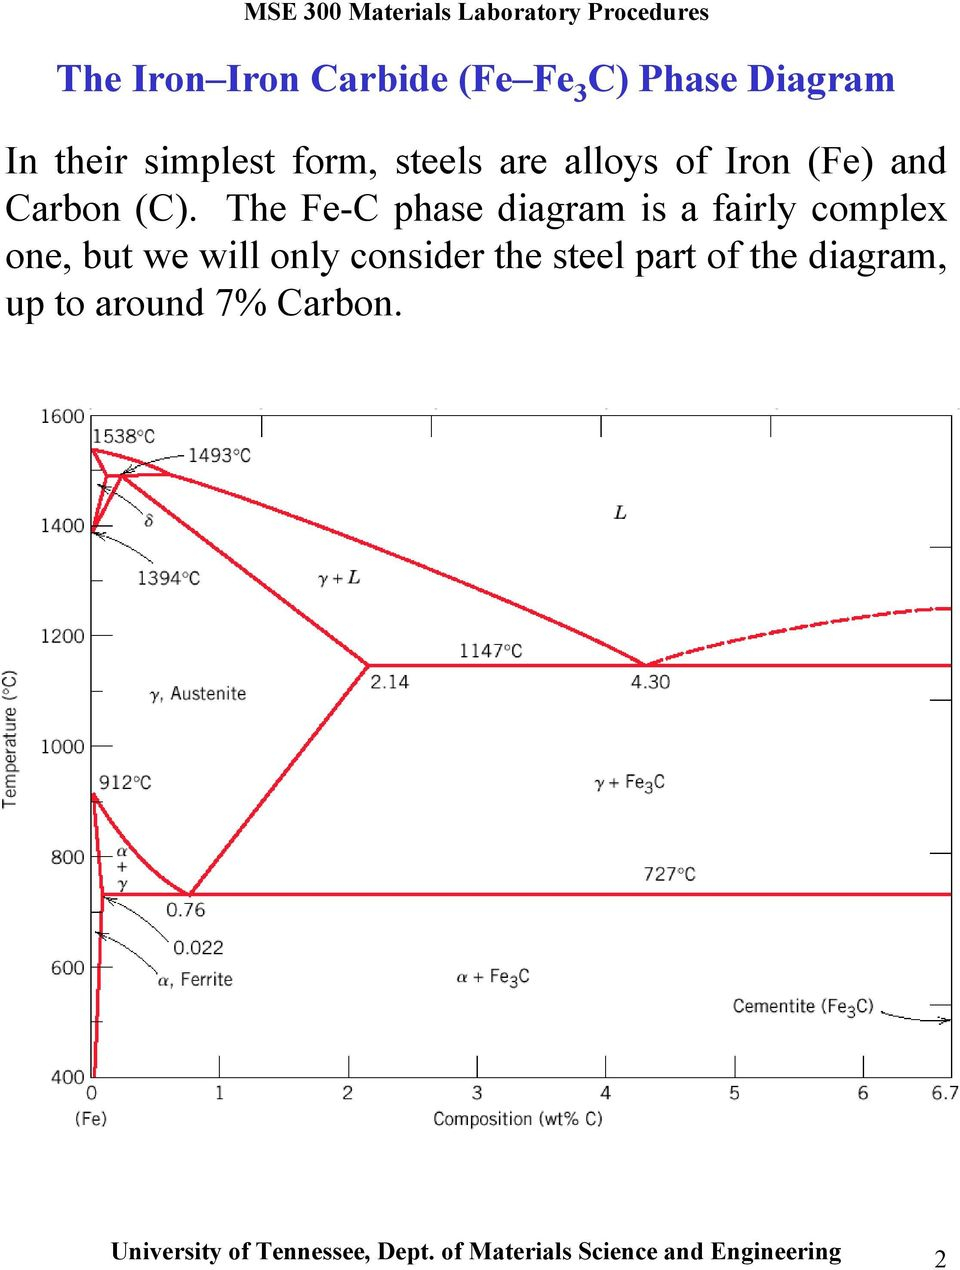 Iron Carbon Phase Diagram Iron Carbon Phase Diagram A Review See Callister Chapter 9 Pdf